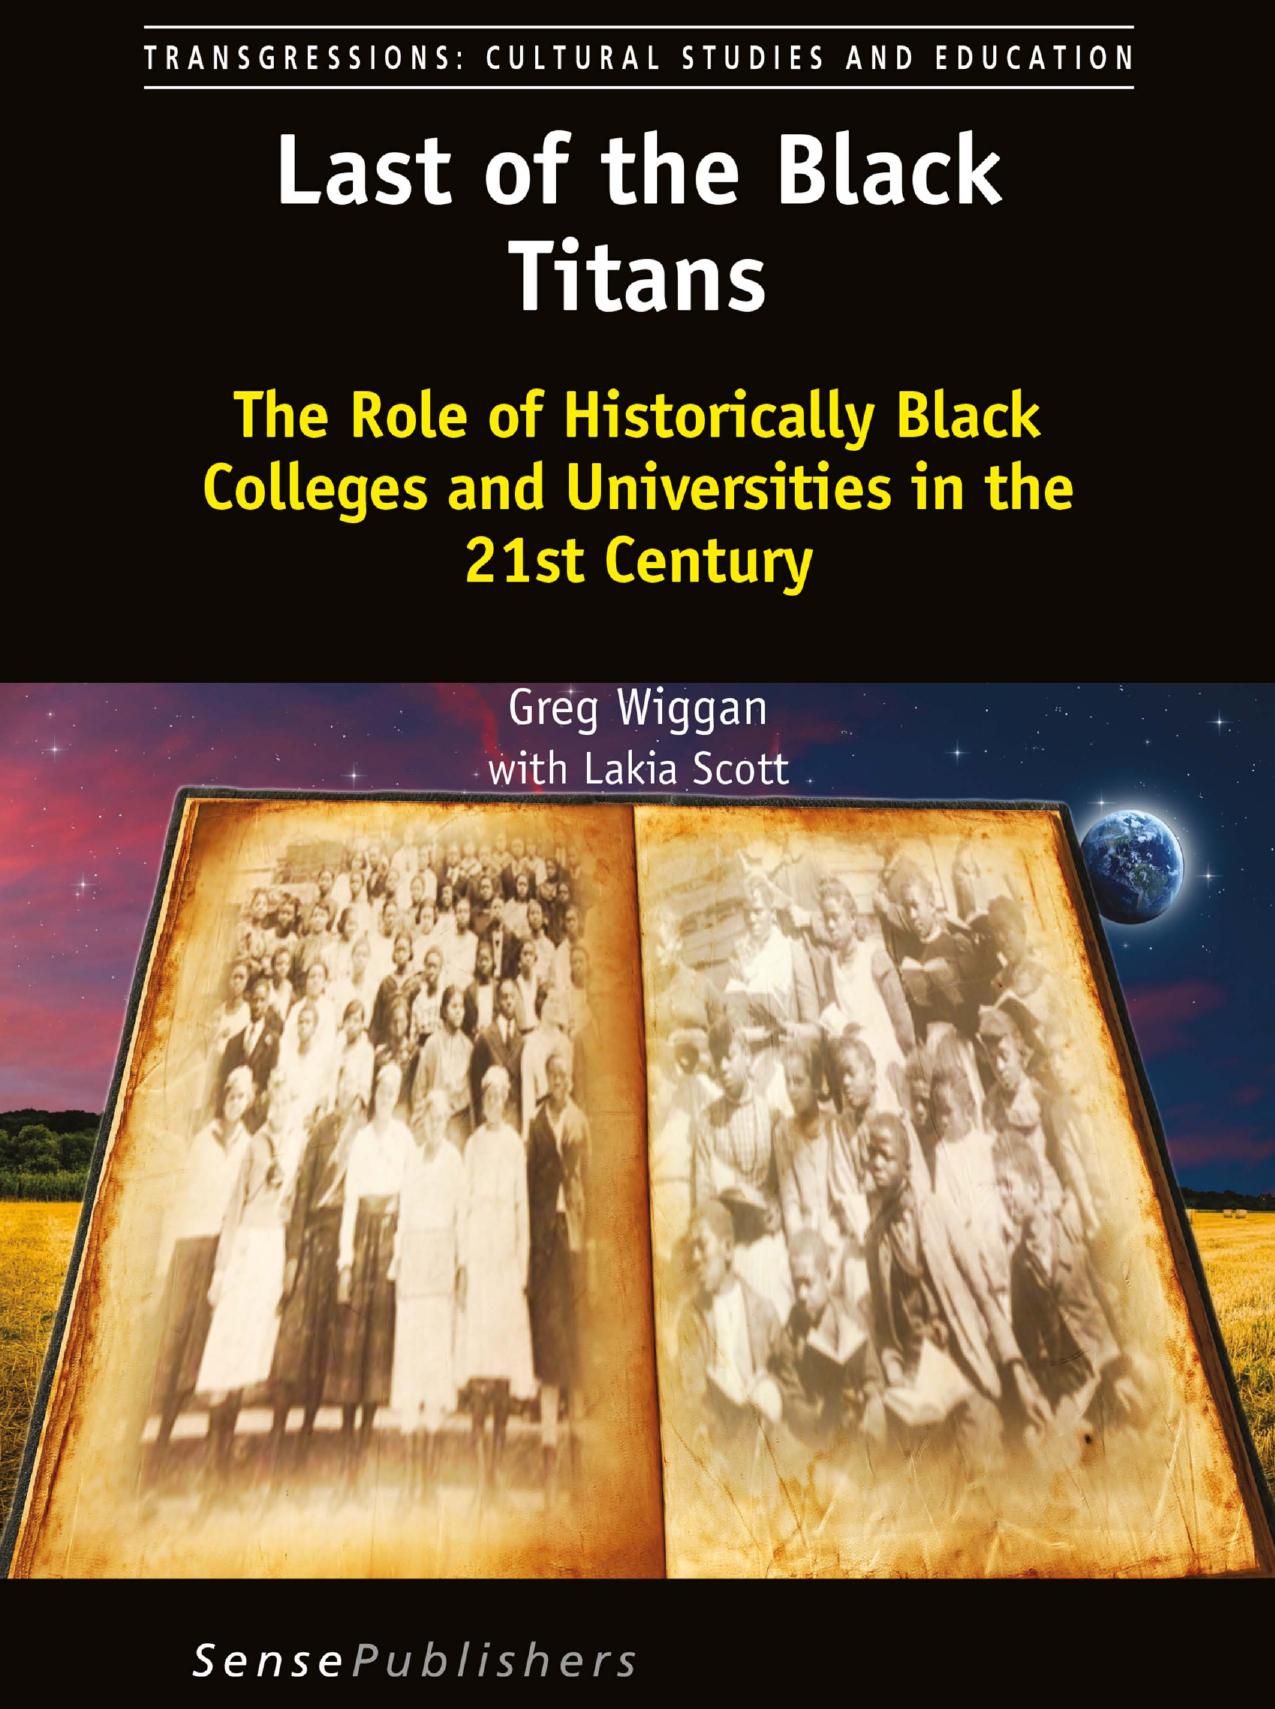 Last of the Black Titans The Role of Historically Black Colleges and Universities  in the 21st Century, 2015